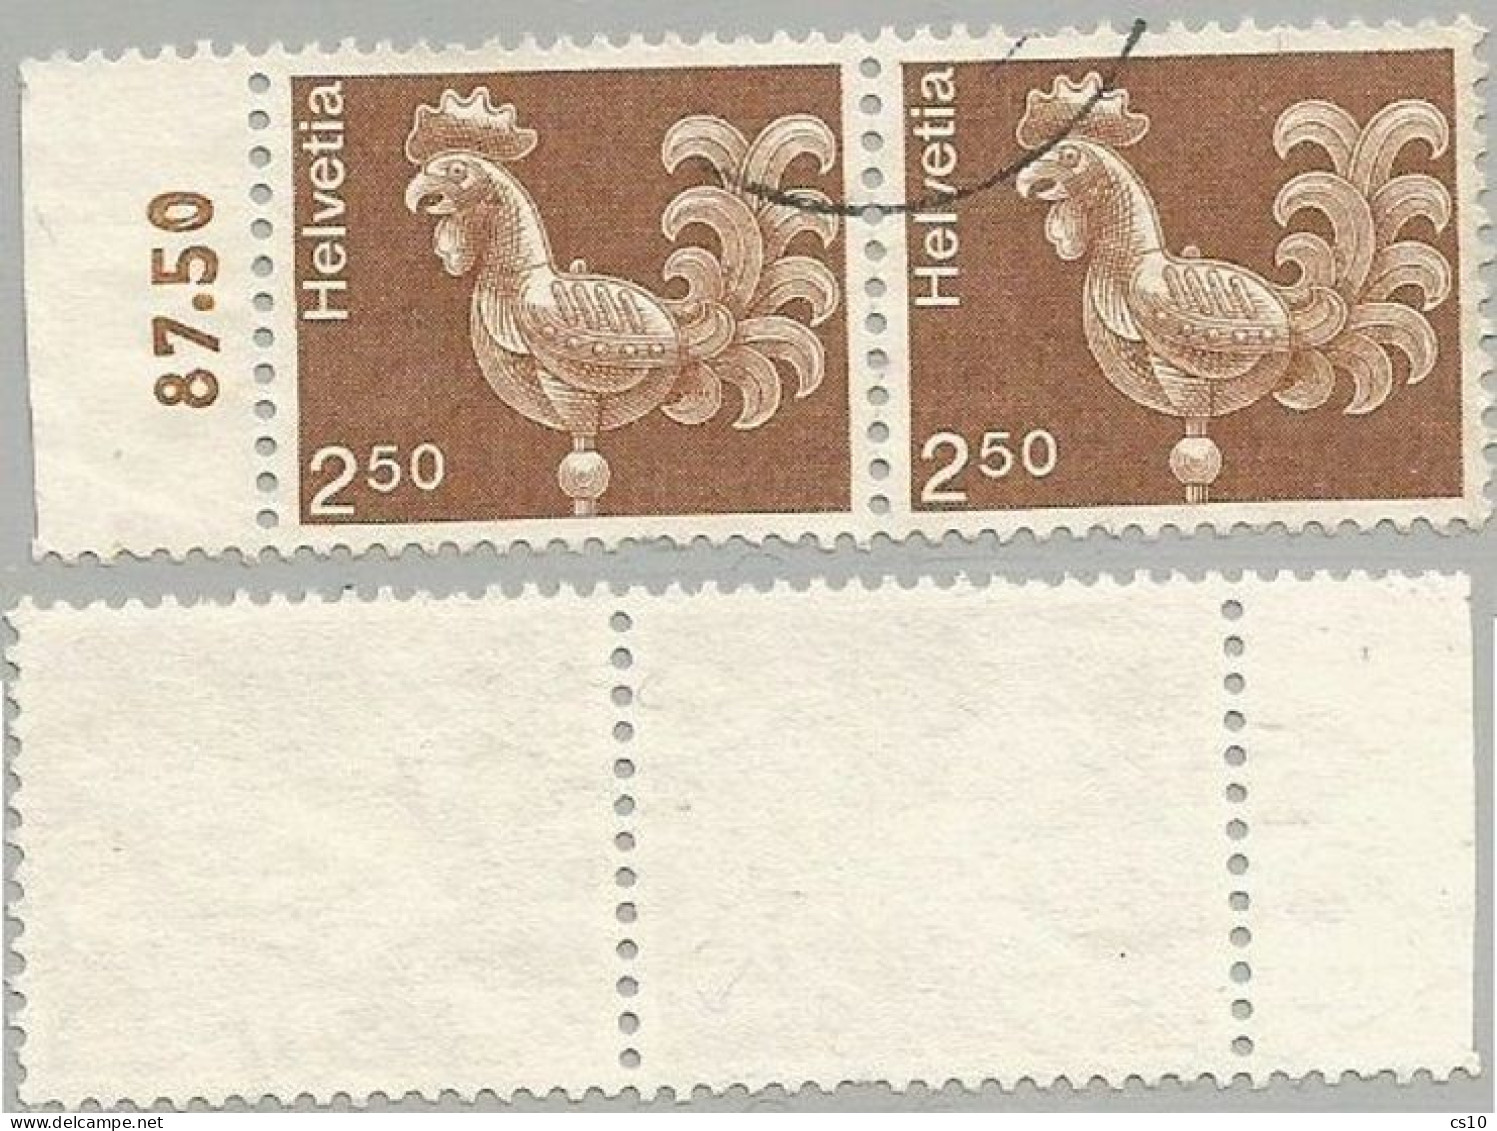 Suisse 1975 Artworks Wheatercock FS.2,50 - Scarce Variety NON FLUO PAPER - #2 Pcs In Horiz. Pair With Sheet Margin - Errors & Oddities